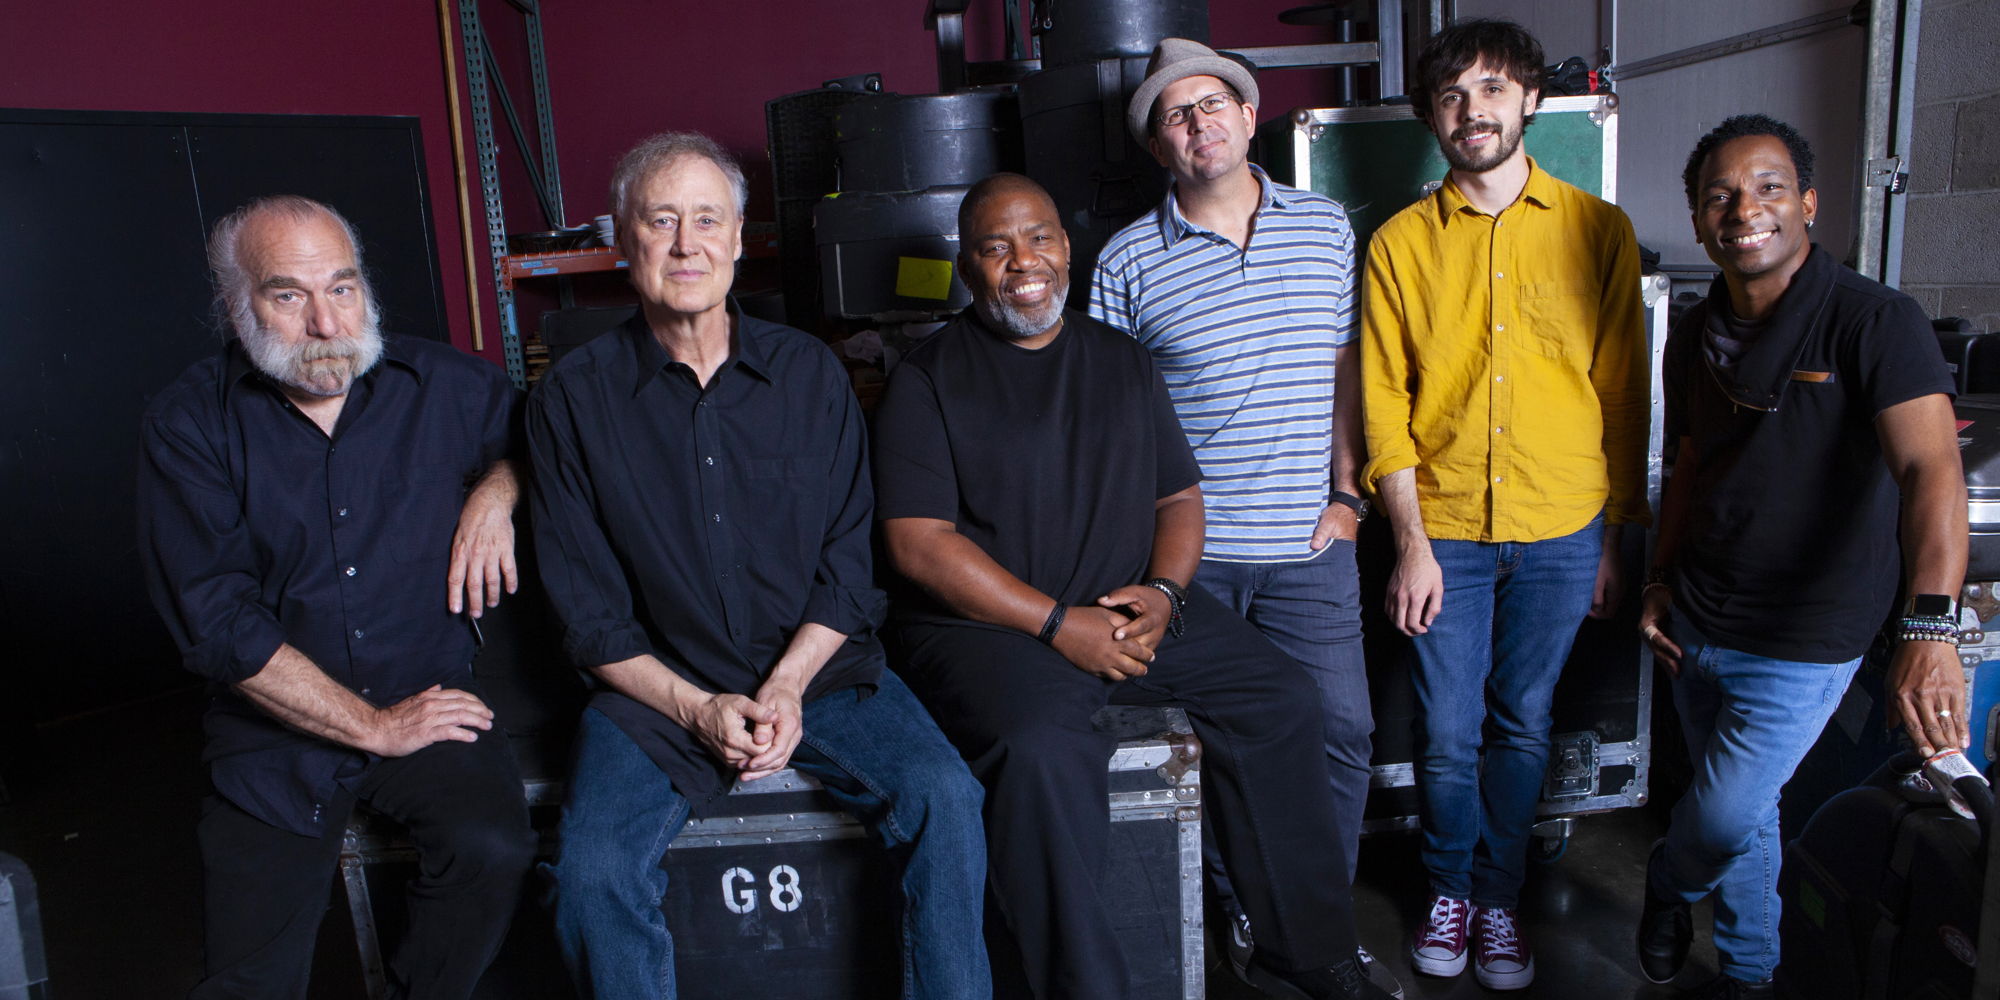 Bruce Hornsby & the Noisemakers promotional image